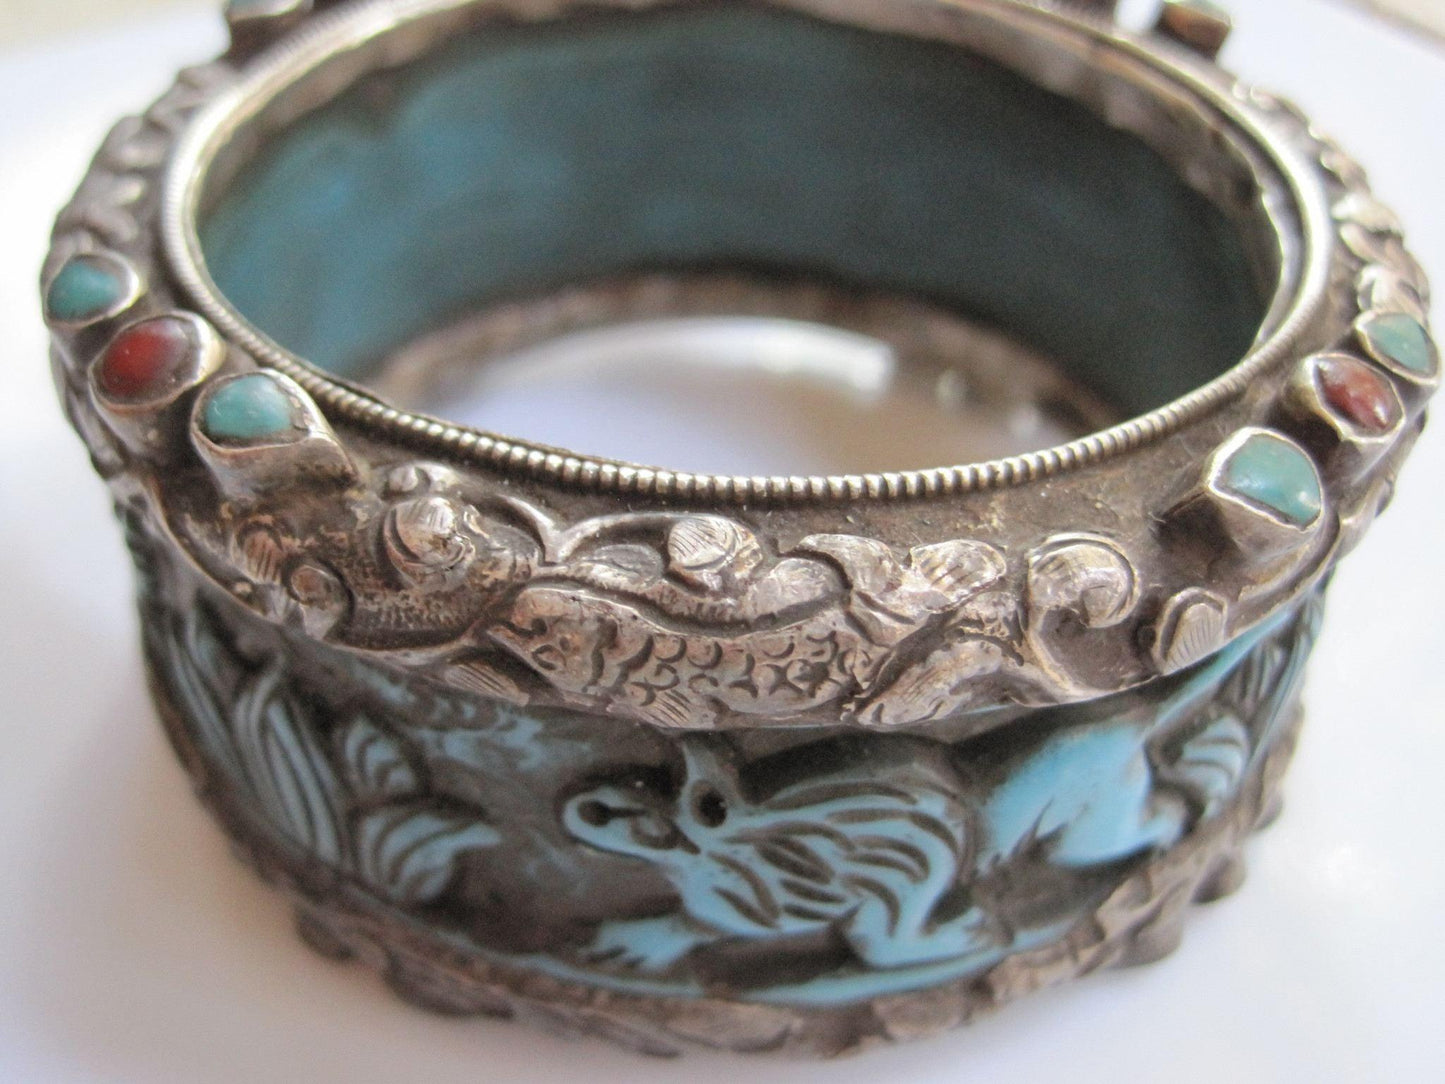 Vintage Carved Animal Blue Resin Bracelet from Nepal or Tibet with Silver Overlay - Anteeka